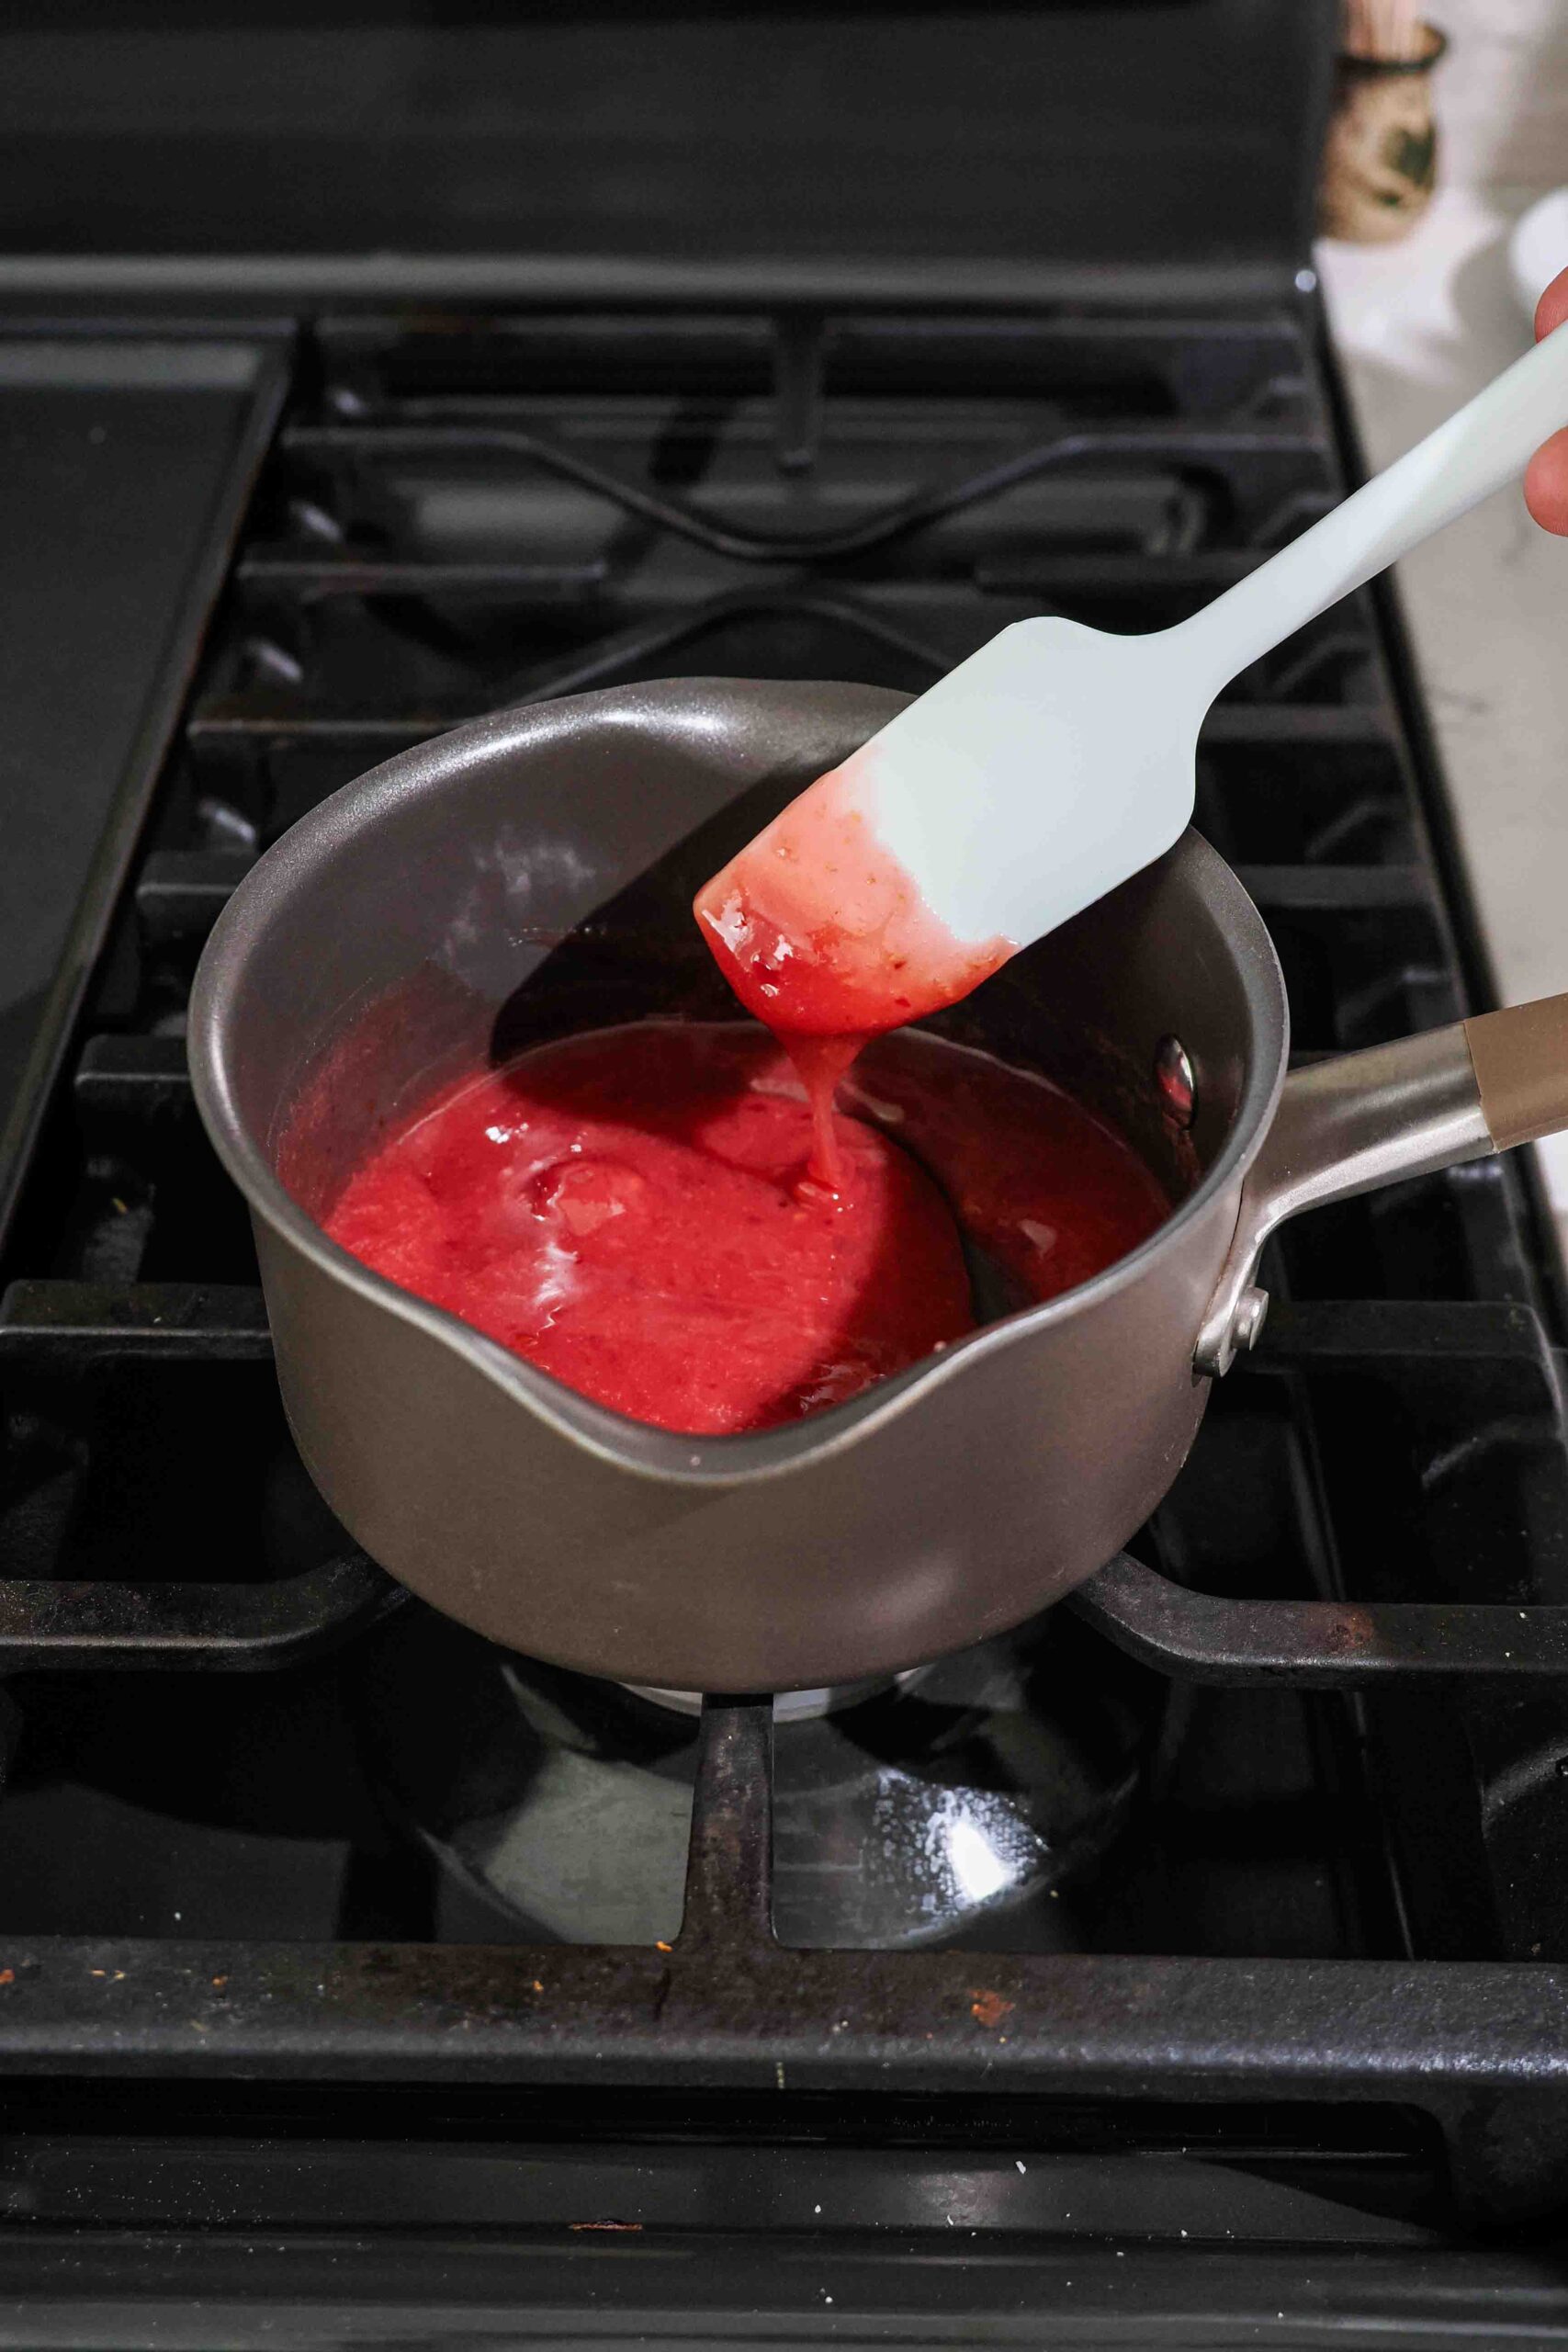 A spatula drips thickened cherry filling back into a saucepan on the stove.